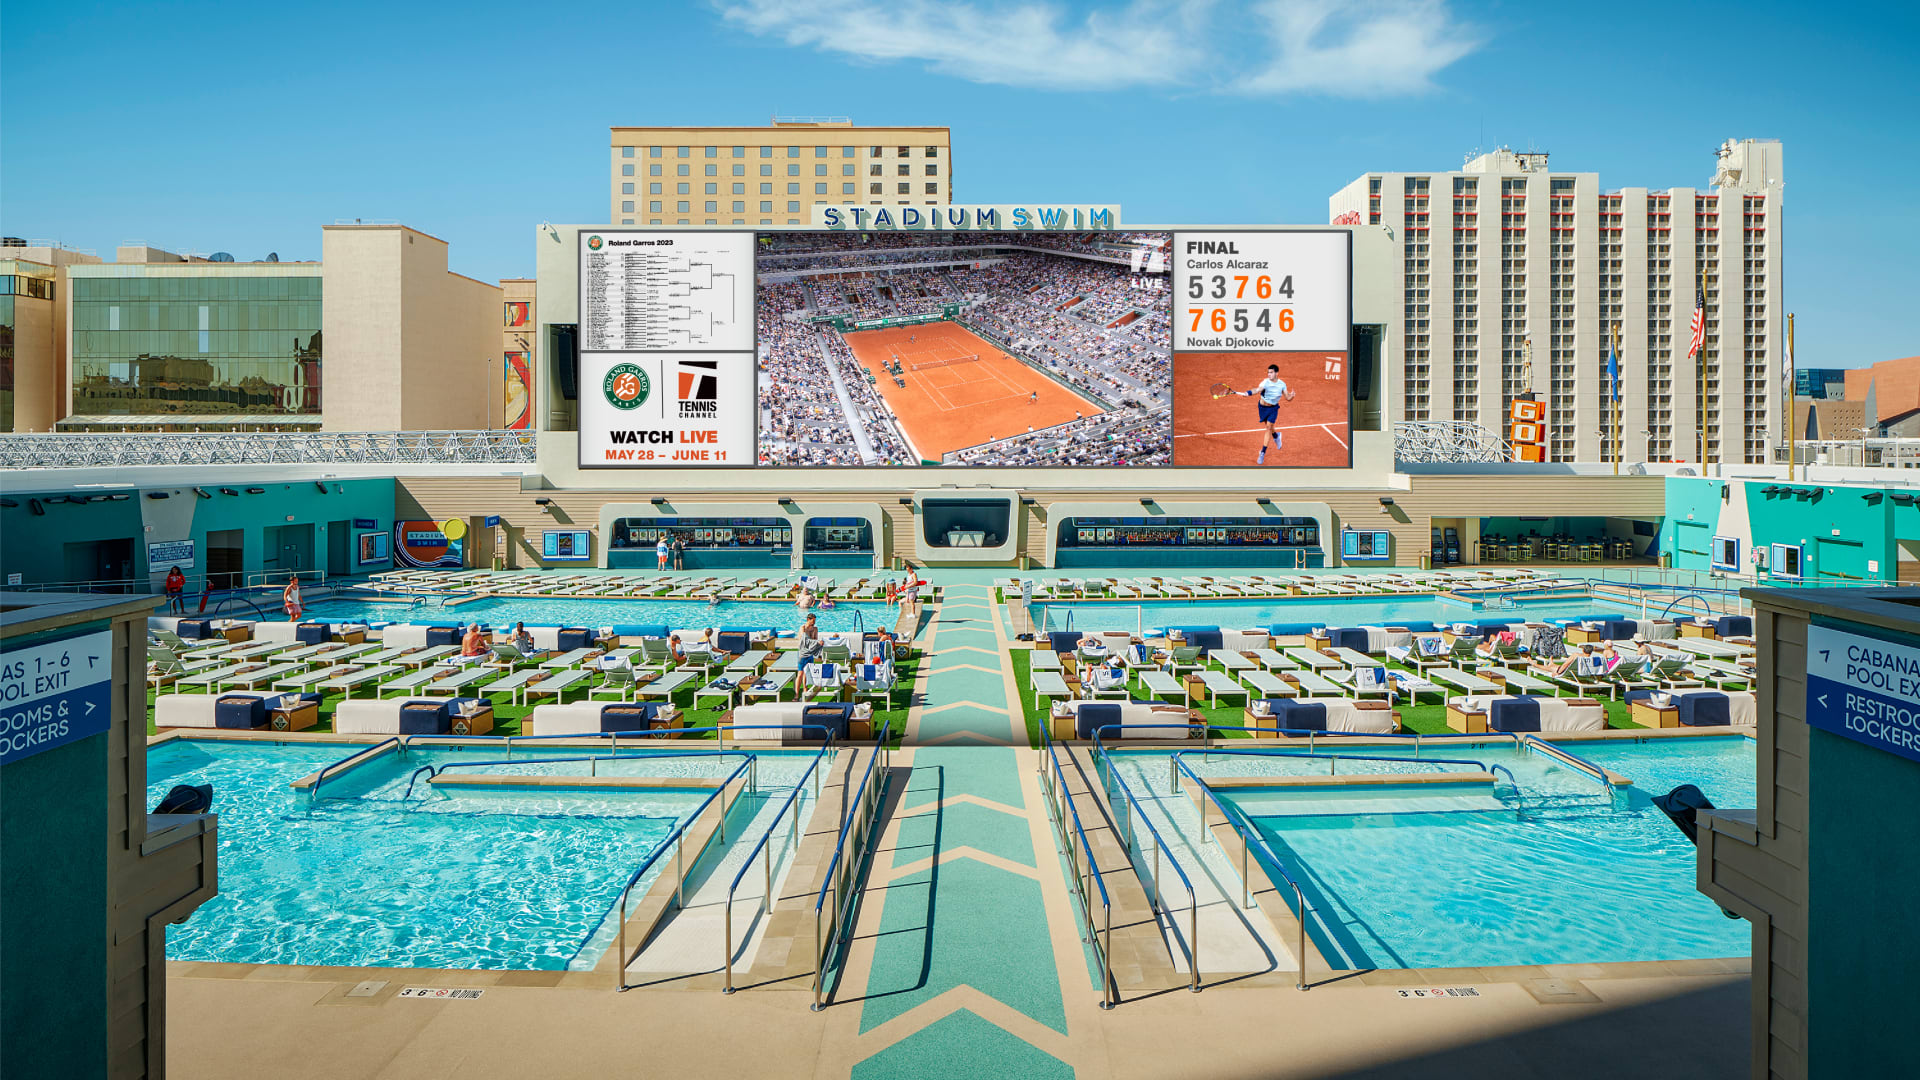 Circas Stadium Swim serves up a Roland Garros watch party unlike any other